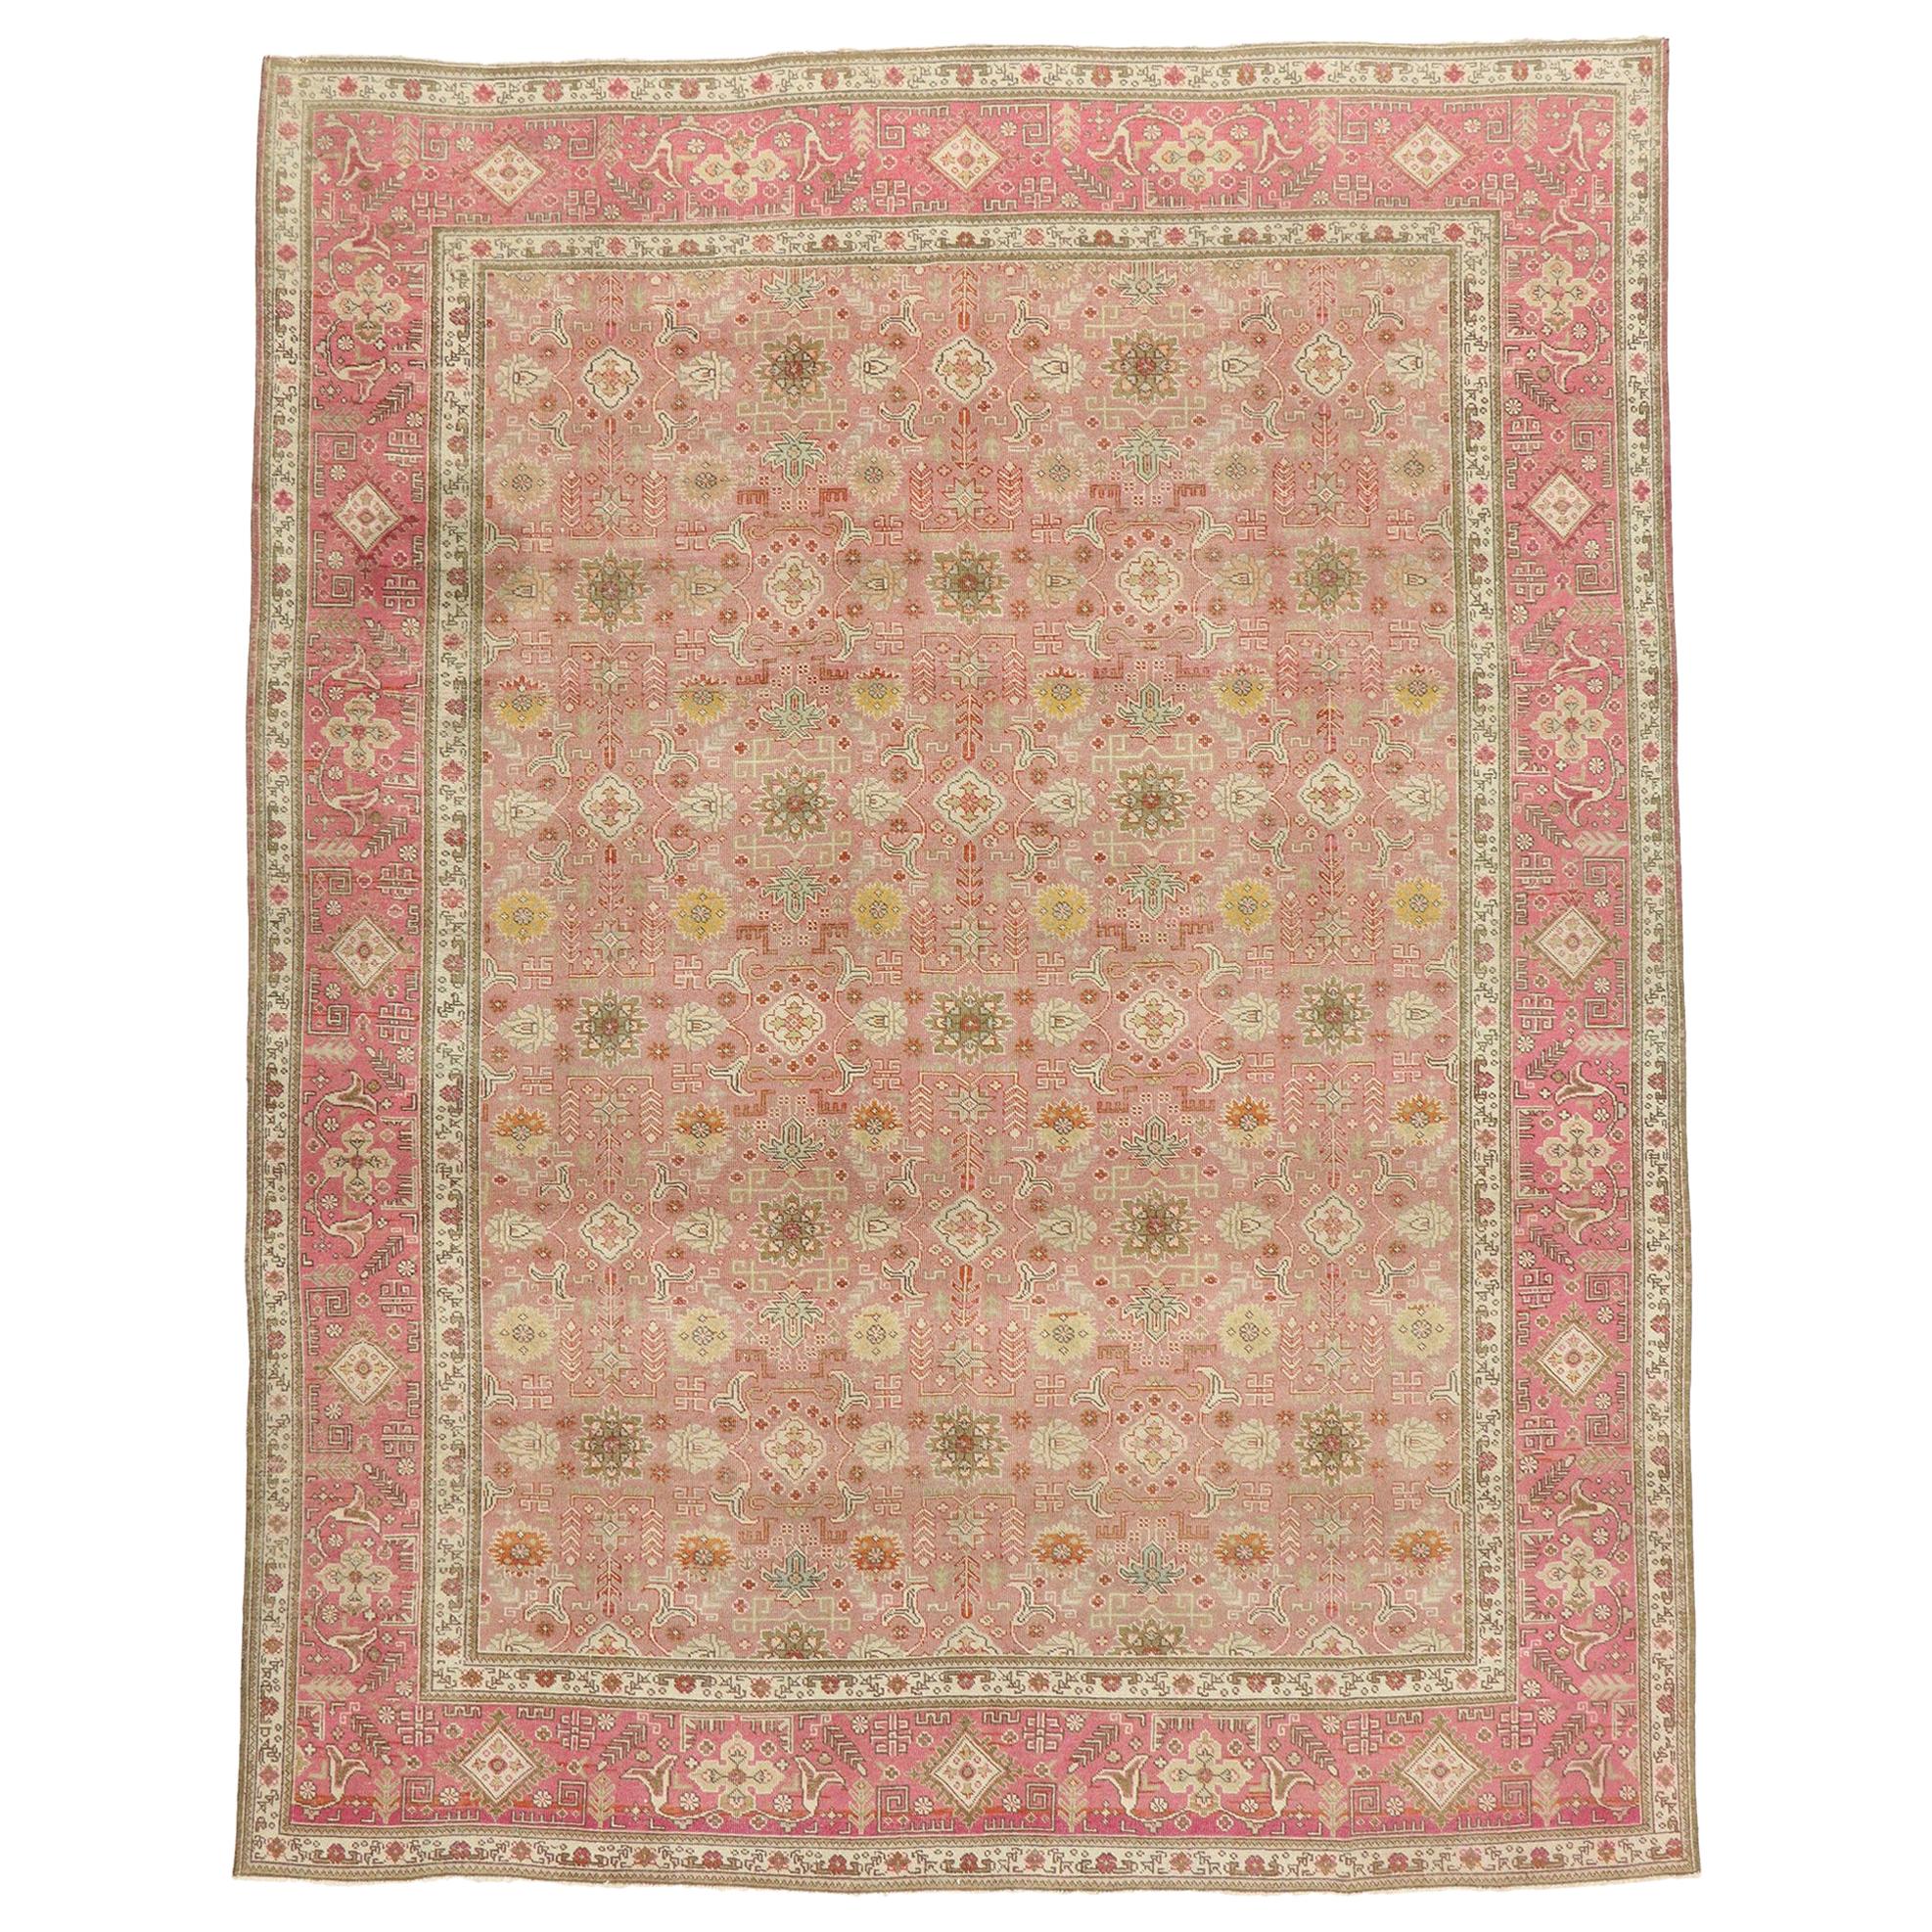 Distressed Vintage Persian Tabriz Rug with Romantic Boho Chic Style